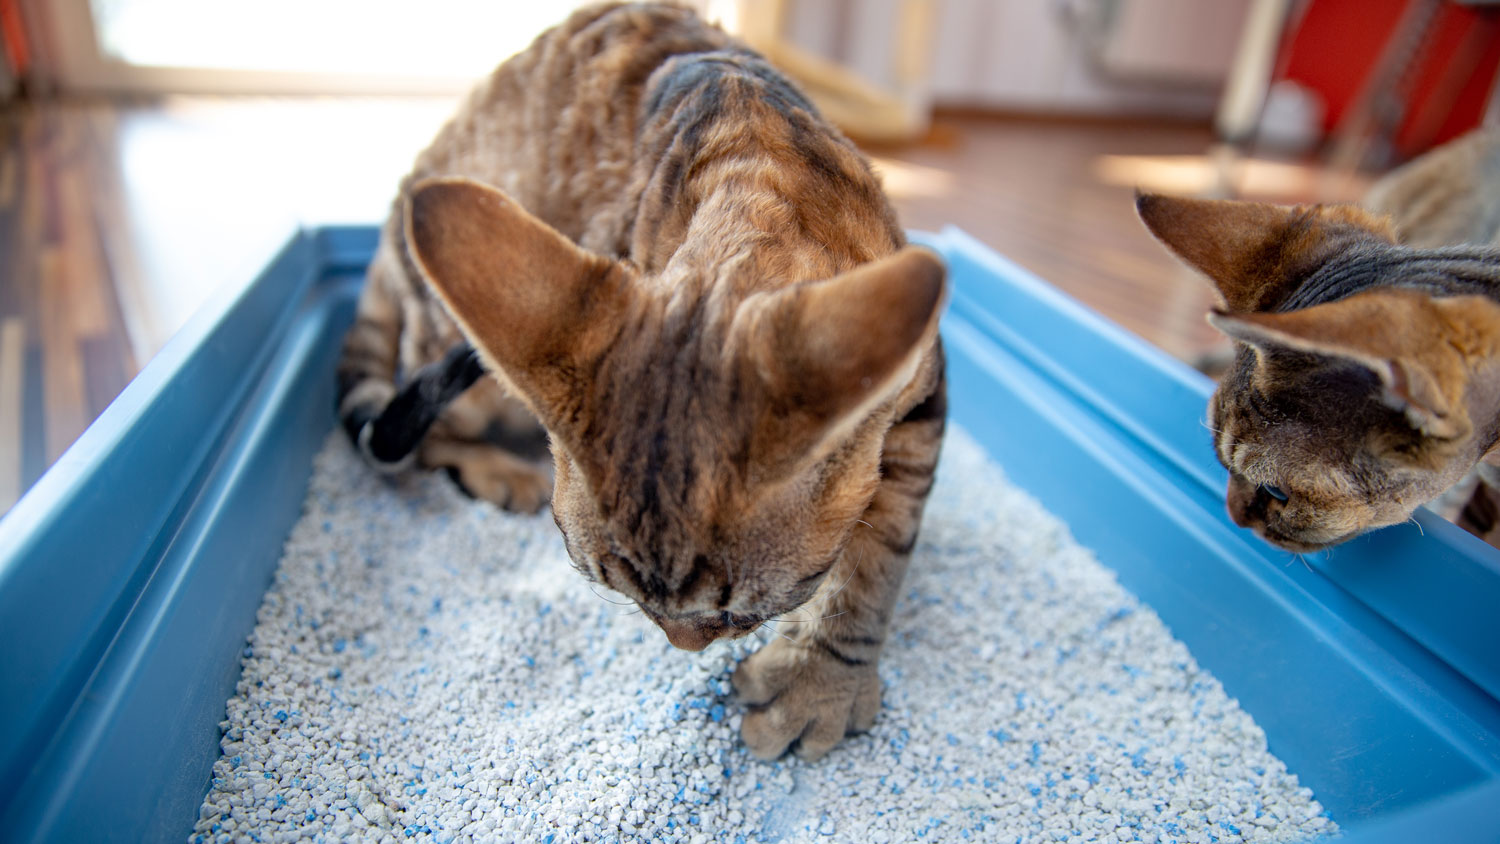 Cat scooting: It’s regular or an indication of an issue? A vet explains